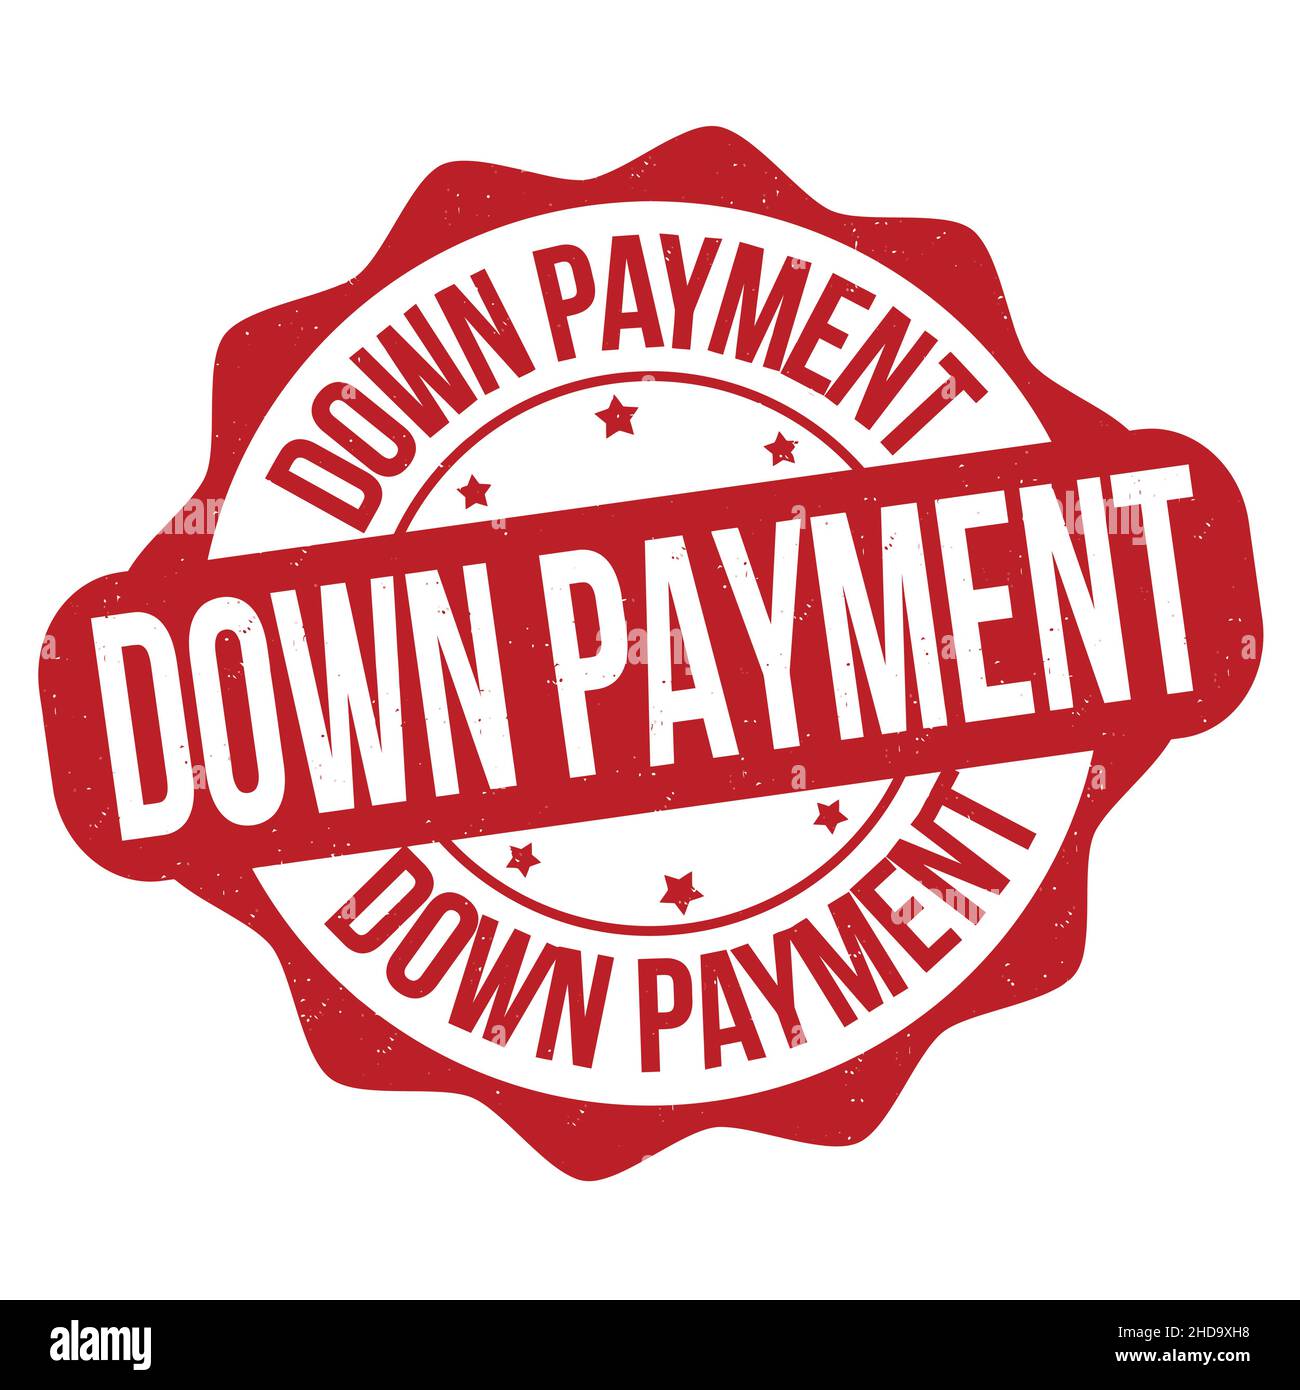 Down payment grunge rubber stamp on white background, vector illustration Stock Vector